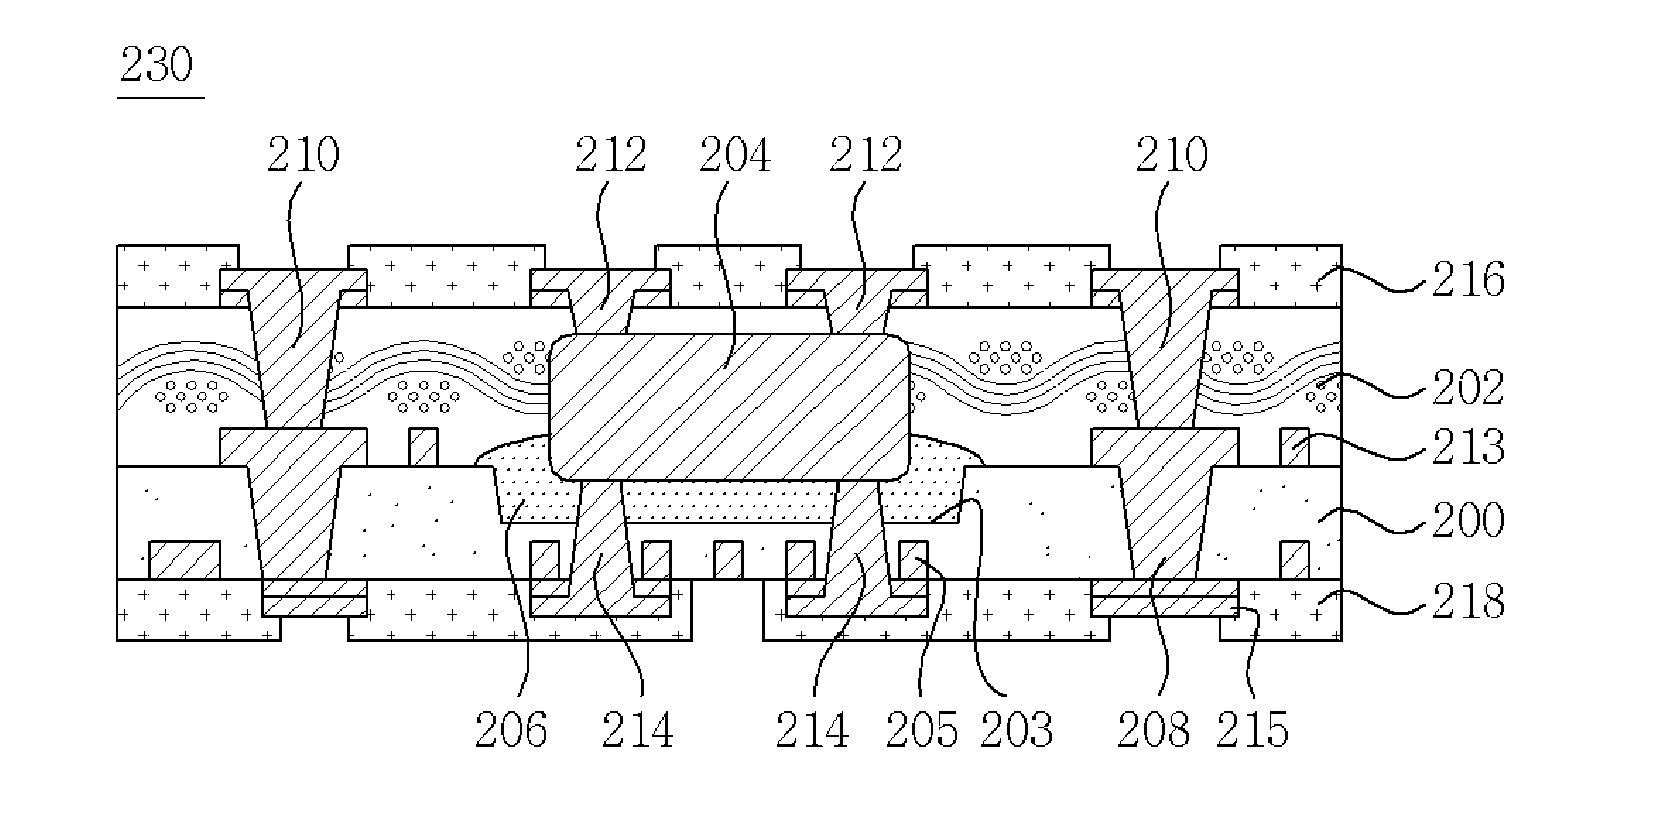 Embedded printed circuit board and method of manufacturing the same